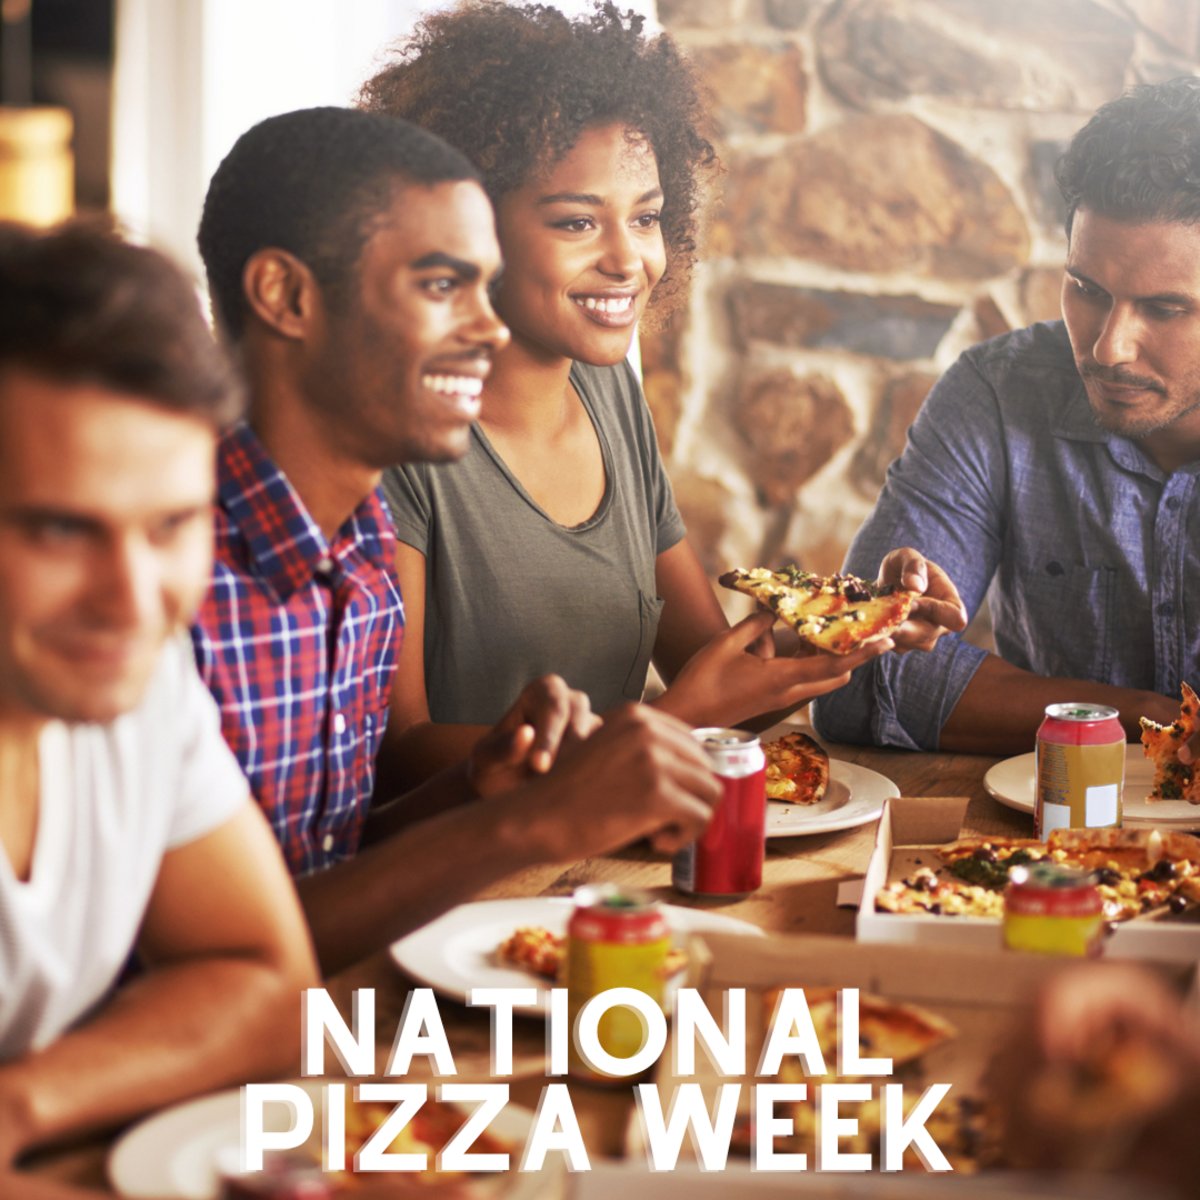 It's National Pizza Week! 🍕 Celebrate the week by stopping by our locals-favorite full bar and dig into a slice or two of their Chicago-style pizza surrounded by the ambiance of the old Red Dog Saloon. #NationalPizzaWeek #chicagostylepizza #VCfoodie